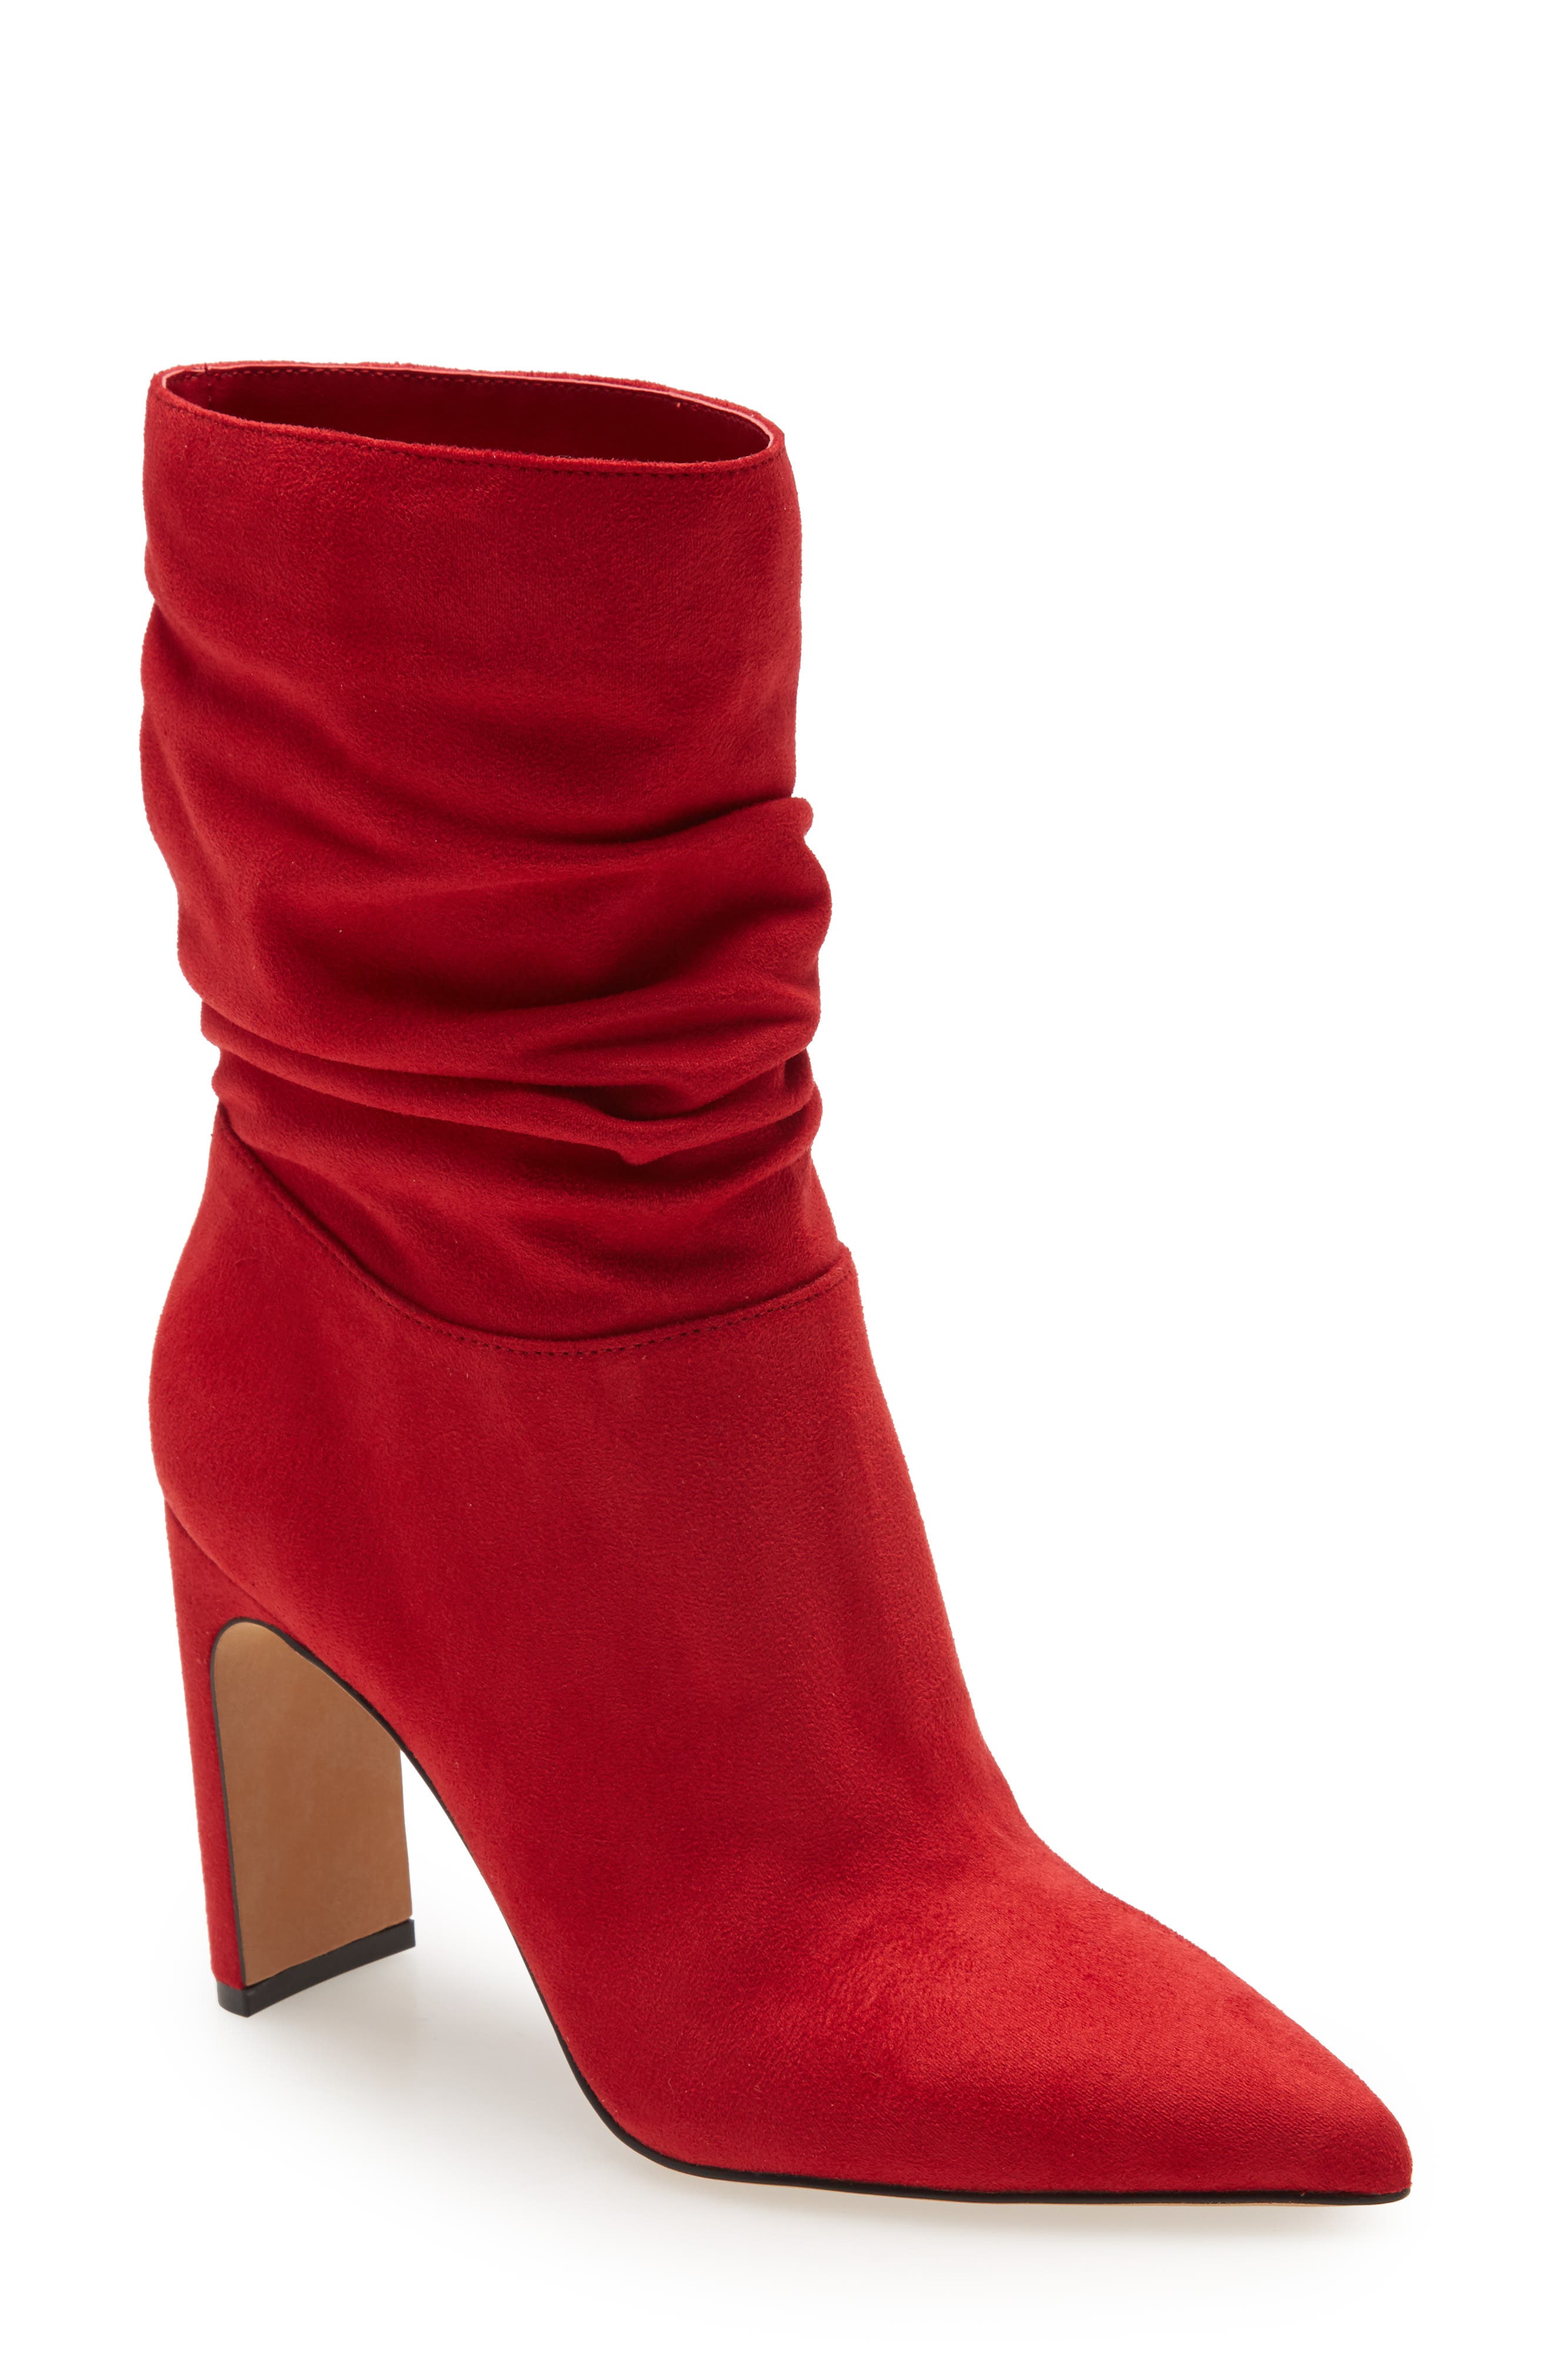 Women's Red Jessica Simpson Shoes 